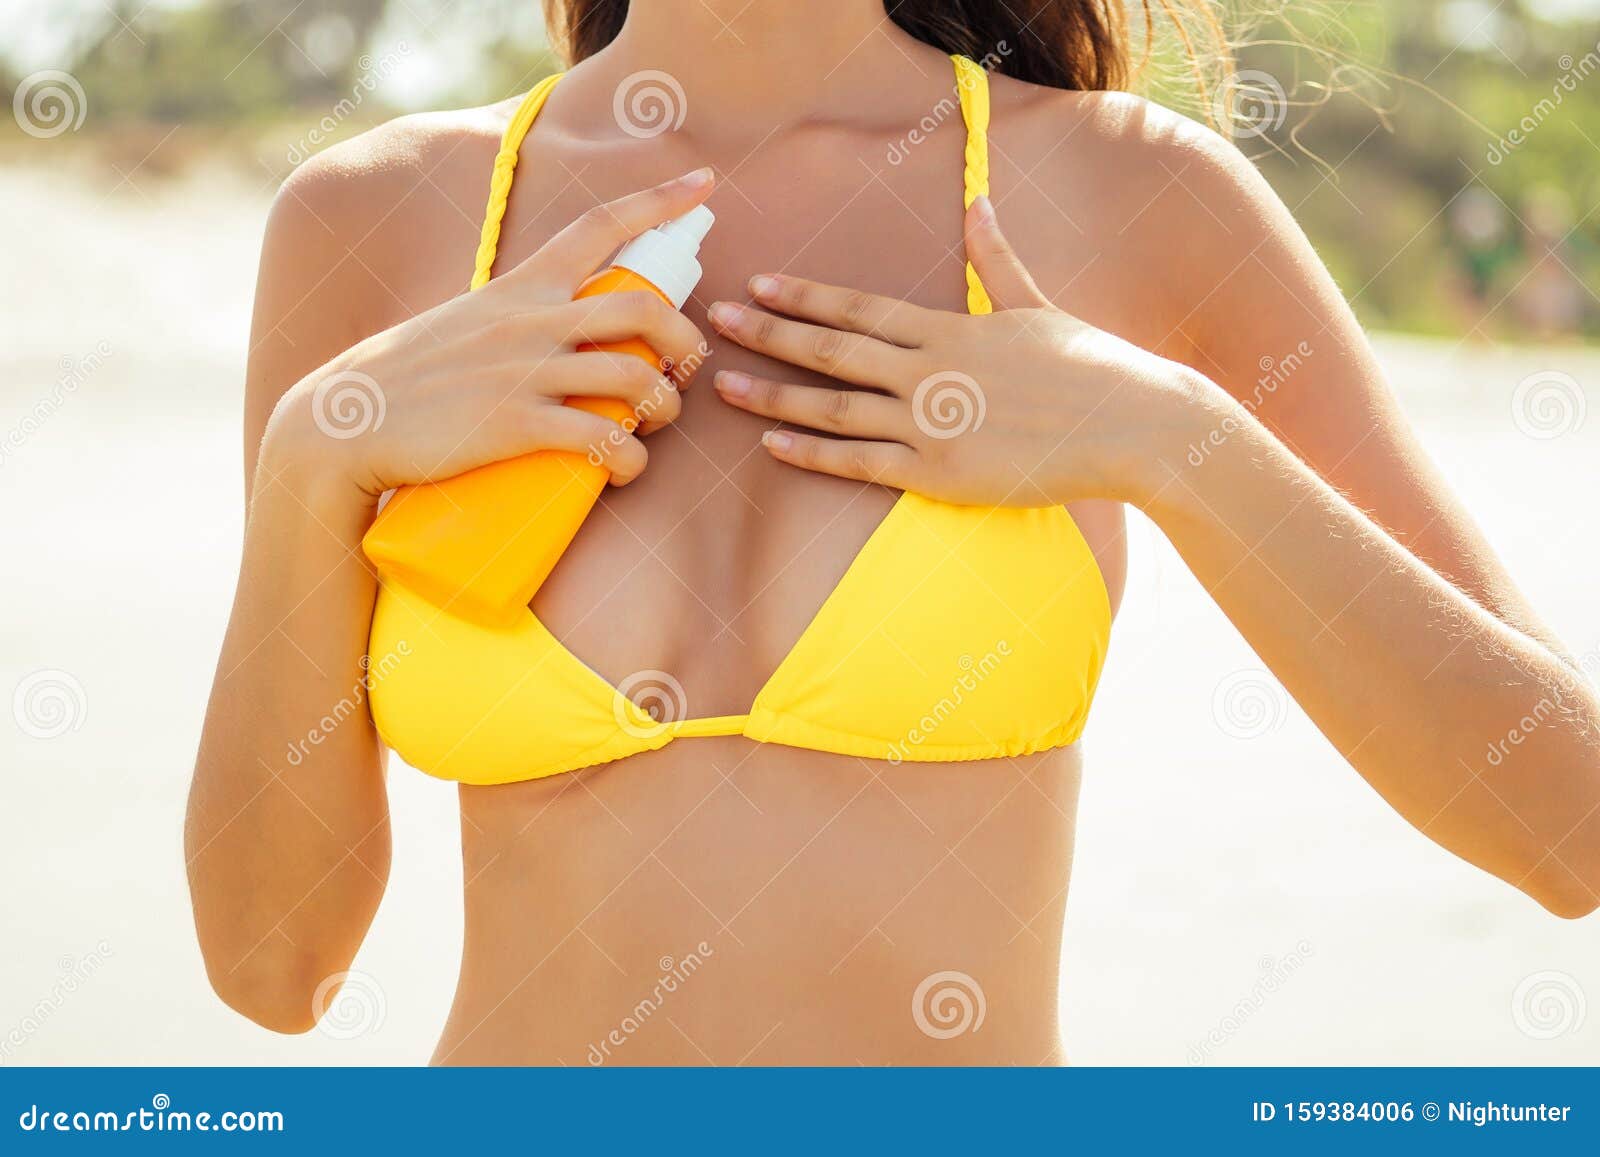 Beautiful Tanned Female Fitness Big Boobs Model Holding Spf Bottle Applying  on the Chest in a Fashion Stylish Swimsuit Stock Photo - Image of beach,  moisturizer: 159384006